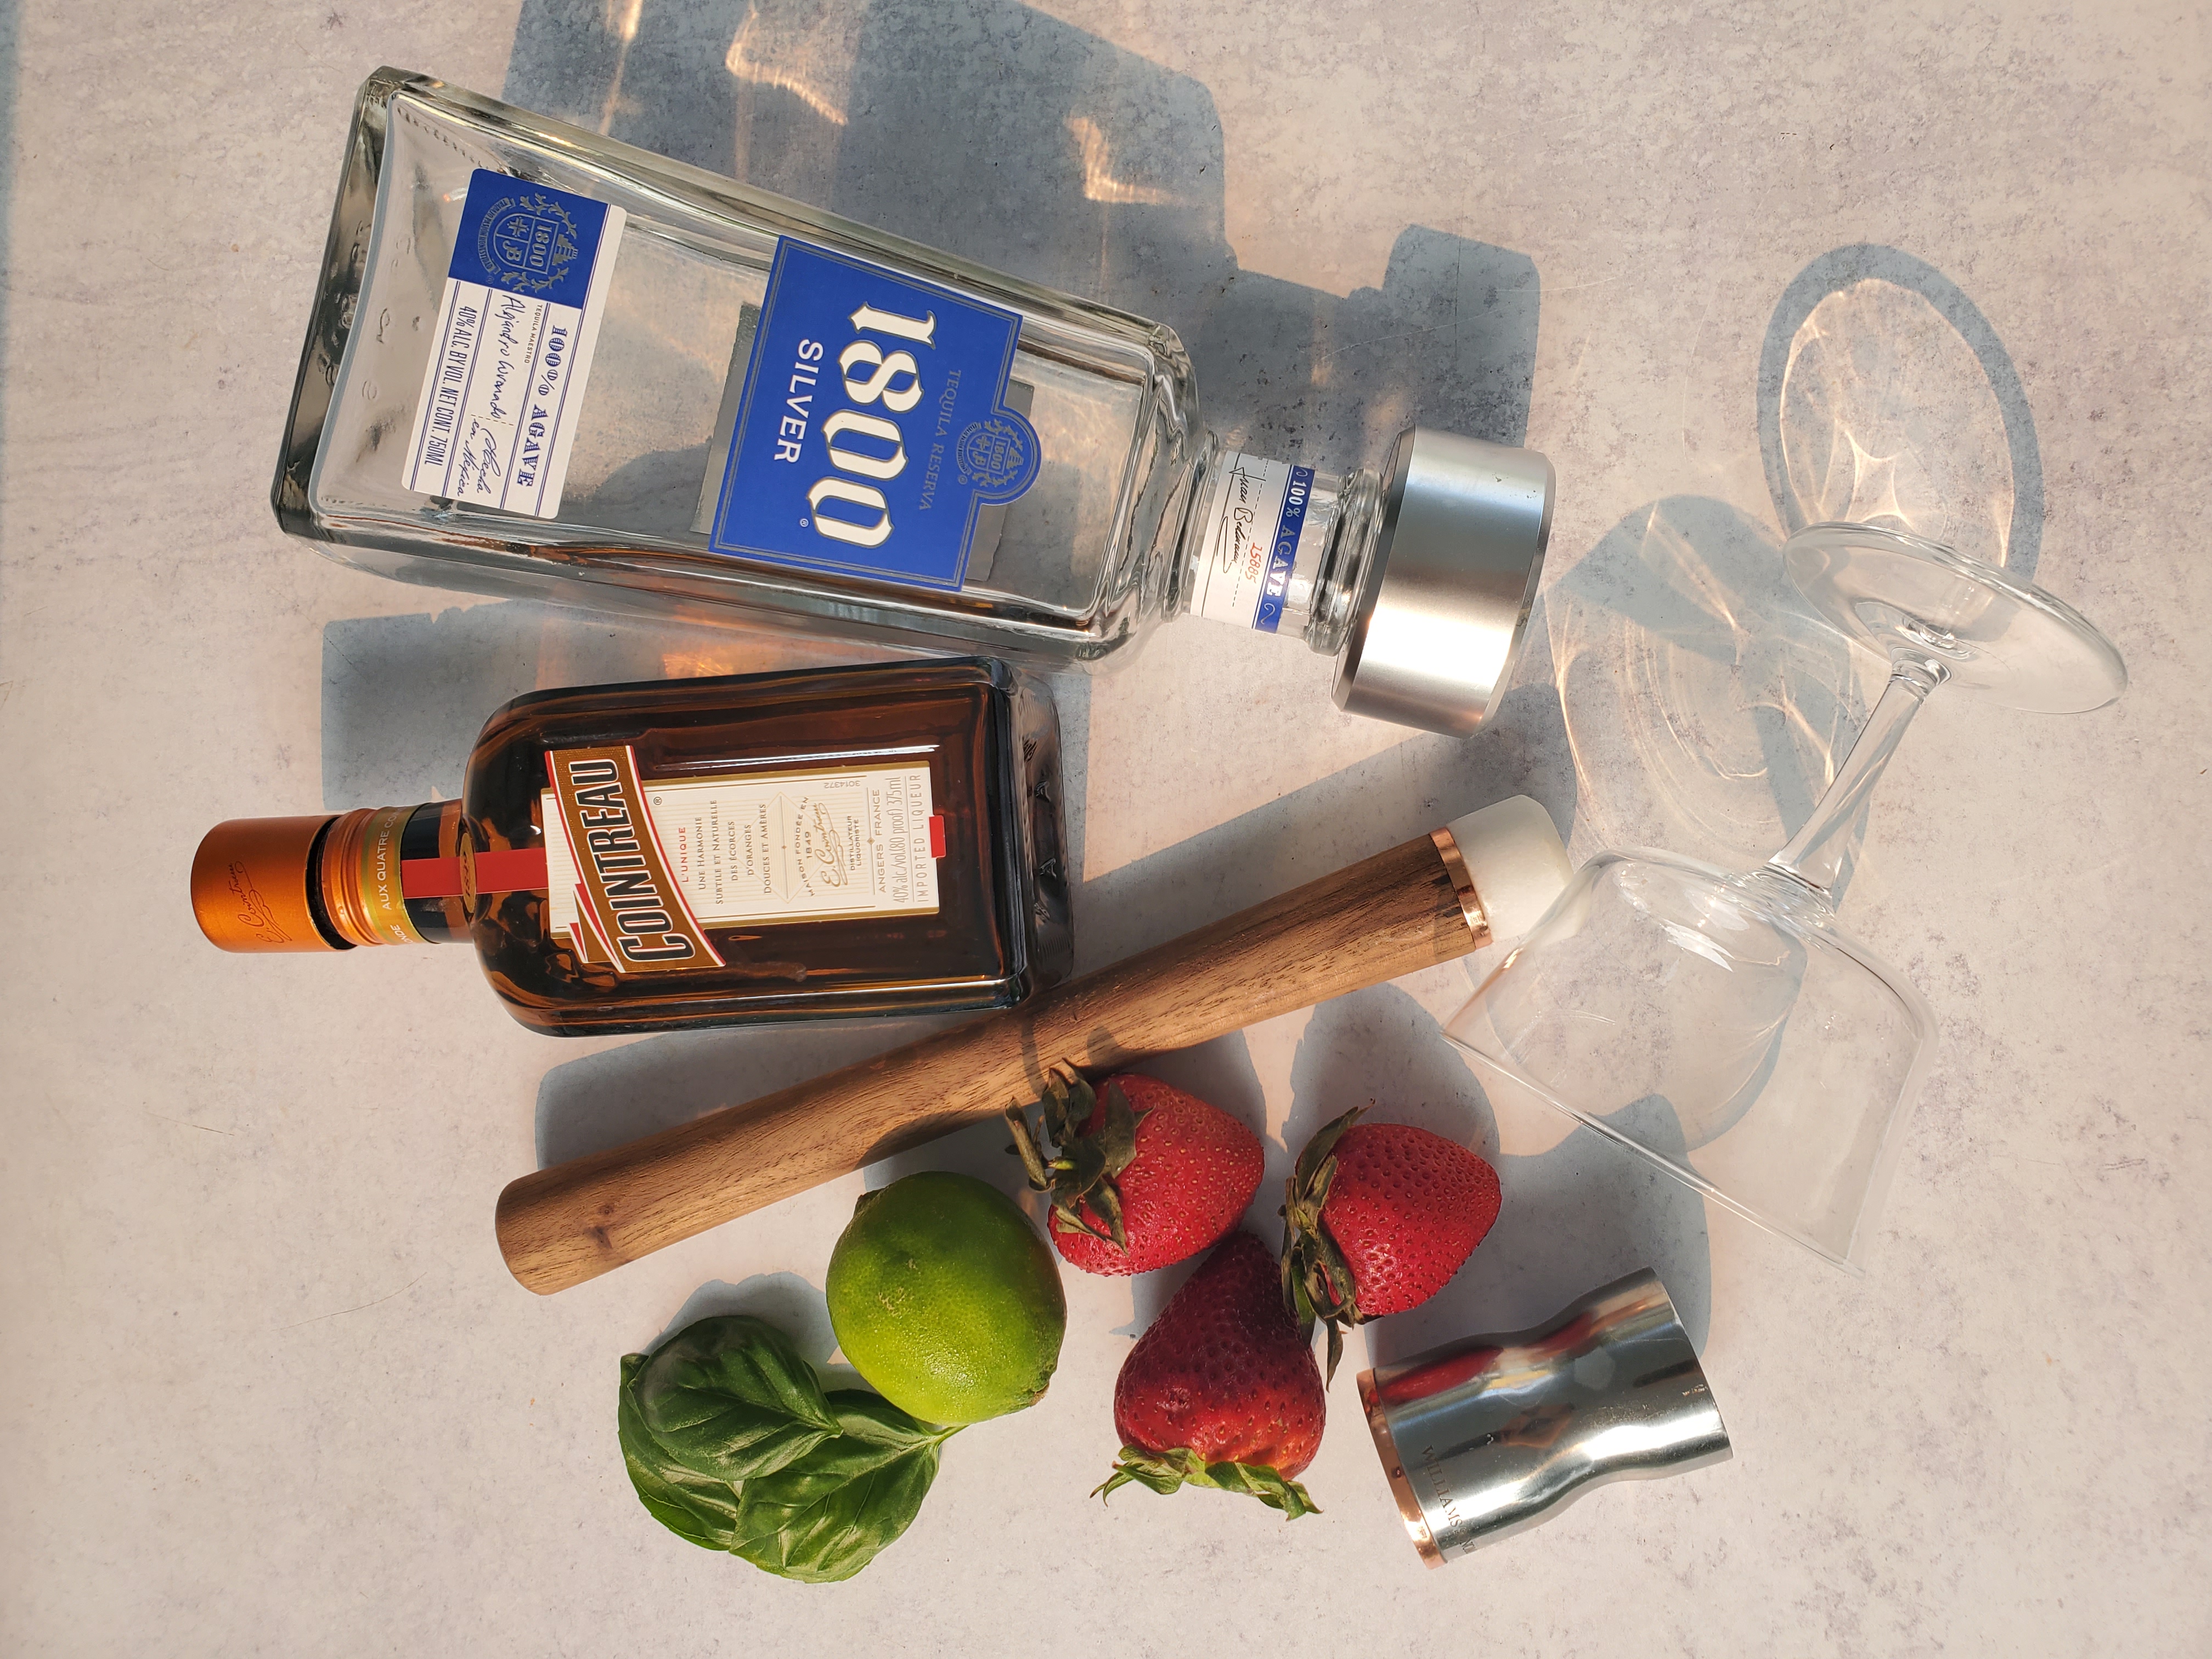 ingredients for a strawberry basil margarita:  tequila, cointreau, limes, basil, strawberries